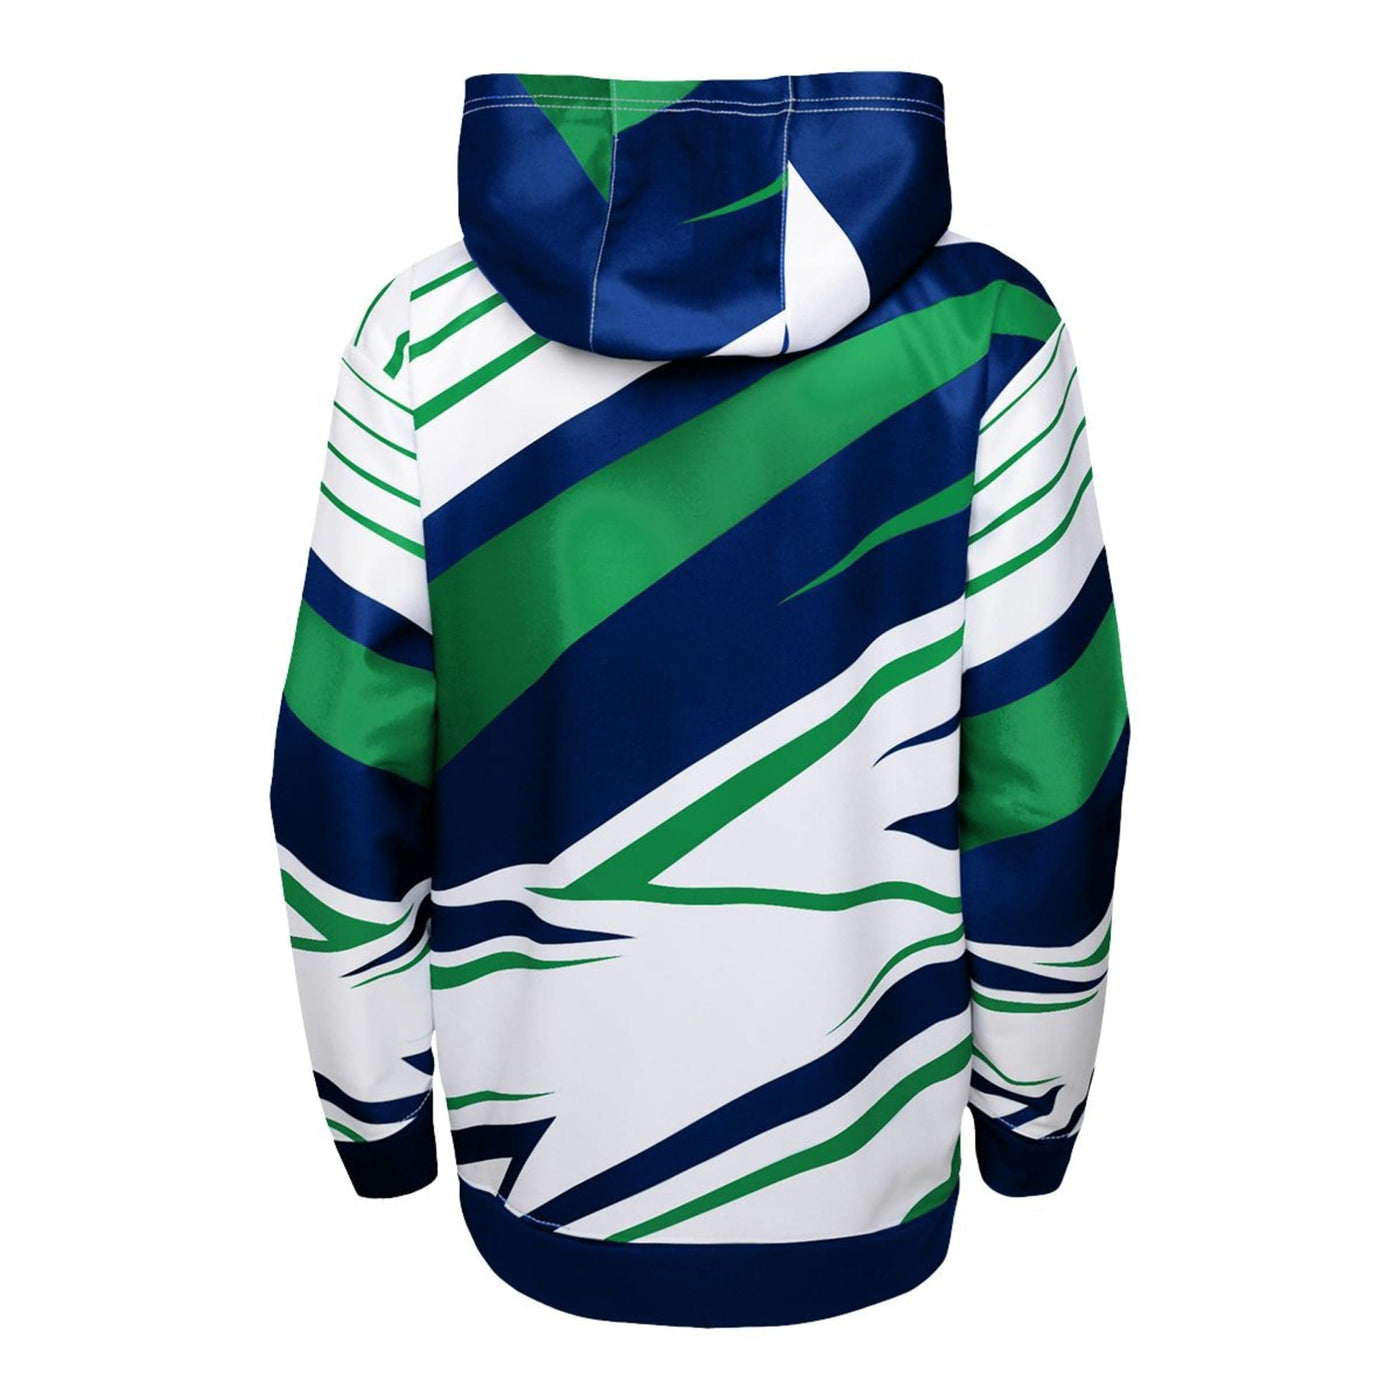 Outer Stuff Sublimated Boys Hoody - Vancouver Canucks - TheHockeyShop.com